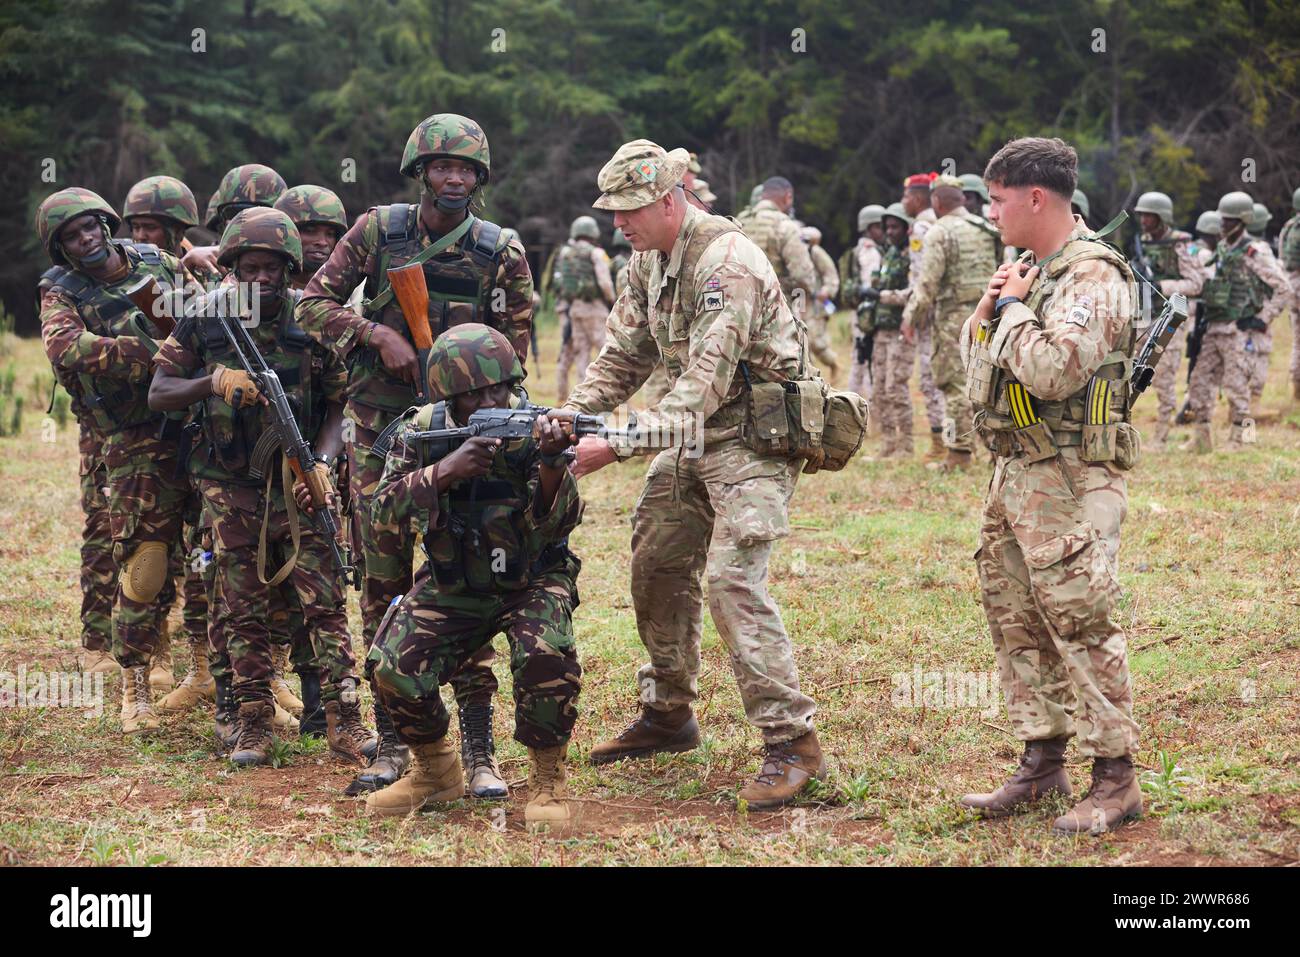 British Army soldiers from the 1st Battalion Irish Guards, part of the 11th Security Force Brigade, instruct military members of the Kenya Defence Forces on urban combat operations during Justified Accord 2024 (JA24) at the Counter Insurgency Terrorism and Stability Operations Training Centre in Nanyuki, Kenya, February 26, 2024. JA24 is U.S. Africa Command's largest exercise in East Africa, running from February 26 - March 7. Led by U.S. Army Southern European Task Force, Africa (SETAF-AF), and hosted in Kenya, this year's exercise will incorporate personnel and units from 23 nations. This mu Stock Photo